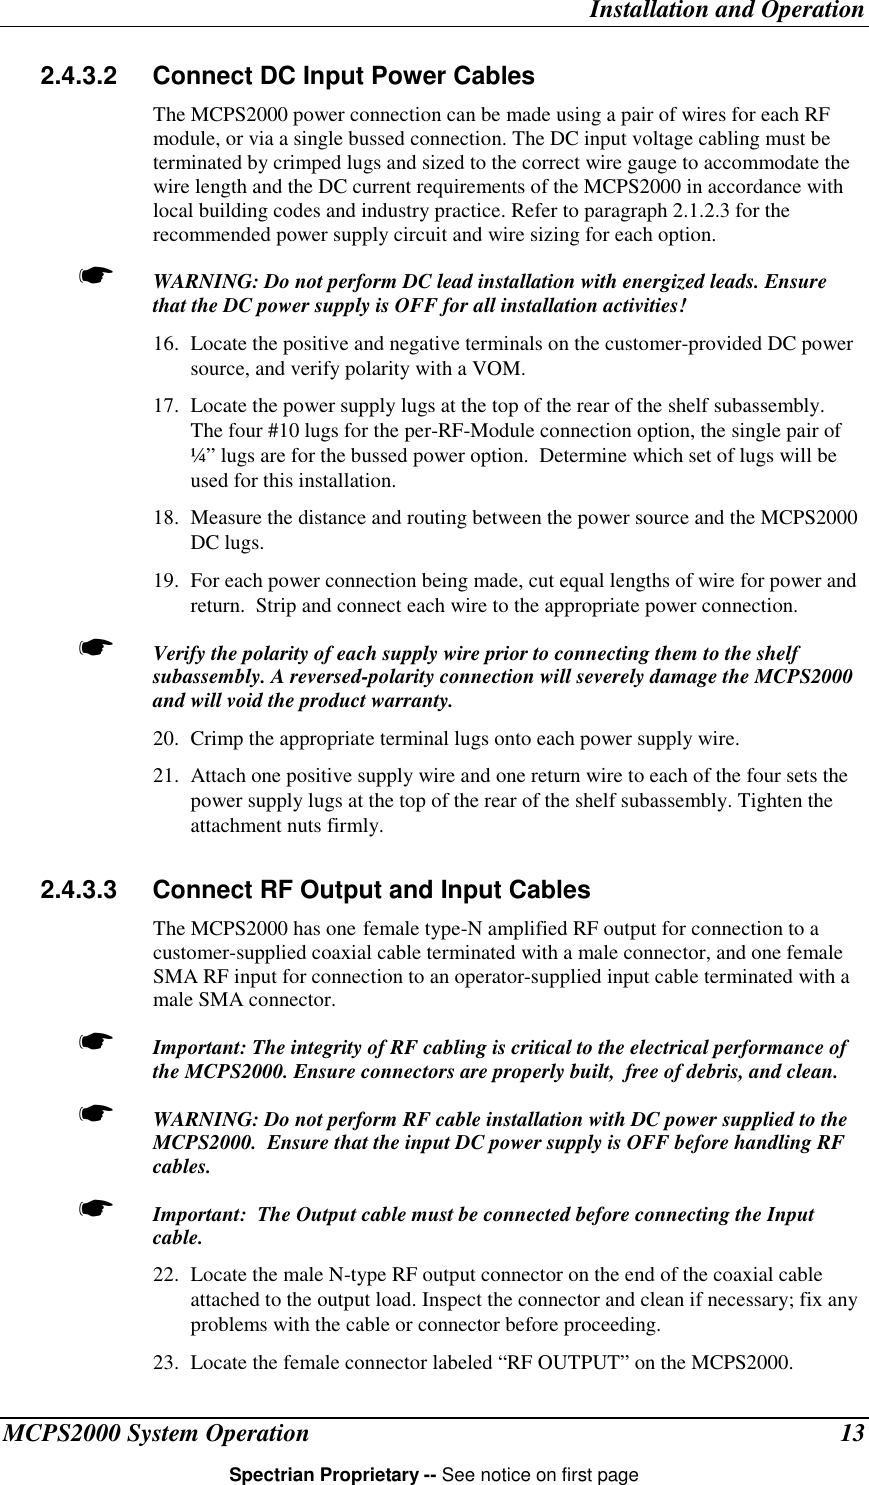 Installation and OperationMCPS2000 System Operation 13Spectrian Proprietary -- See notice on first page2.4.3.2  Connect DC Input Power CablesThe MCPS2000 power connection can be made using a pair of wires for each RFmodule, or via a single bussed connection. The DC input voltage cabling must beterminated by crimped lugs and sized to the correct wire gauge to accommodate thewire length and the DC current requirements of the MCPS2000 in accordance withlocal building codes and industry practice. Refer to paragraph 2.1.2.3 for therecommended power supply circuit and wire sizing for each option.☛ WARNING: Do not perform DC lead installation with energized leads. Ensurethat the DC power supply is OFF for all installation activities!16. Locate the positive and negative terminals on the customer-provided DC powersource, and verify polarity with a VOM.17. Locate the power supply lugs at the top of the rear of the shelf subassembly.The four #10 lugs for the per-RF-Module connection option, the single pair of¼” lugs are for the bussed power option.  Determine which set of lugs will beused for this installation.18. Measure the distance and routing between the power source and the MCPS2000DC lugs.19. For each power connection being made, cut equal lengths of wire for power andreturn.  Strip and connect each wire to the appropriate power connection.☛ Verify the polarity of each supply wire prior to connecting them to the shelfsubassembly. A reversed-polarity connection will severely damage the MCPS2000and will void the product warranty.20. Crimp the appropriate terminal lugs onto each power supply wire.21. Attach one positive supply wire and one return wire to each of the four sets thepower supply lugs at the top of the rear of the shelf subassembly. Tighten theattachment nuts firmly.2.4.3.3  Connect RF Output and Input CablesThe MCPS2000 has one female type-N amplified RF output for connection to acustomer-supplied coaxial cable terminated with a male connector, and one femaleSMA RF input for connection to an operator-supplied input cable terminated with amale SMA connector.☛ Important: The integrity of RF cabling is critical to the electrical performance ofthe MCPS2000. Ensure connectors are properly built,  free of debris, and clean.☛ WARNING: Do not perform RF cable installation with DC power supplied to theMCPS2000.  Ensure that the input DC power supply is OFF before handling RFcables.☛ Important:  The Output cable must be connected before connecting the Inputcable.22. Locate the male N-type RF output connector on the end of the coaxial cableattached to the output load. Inspect the connector and clean if necessary; fix anyproblems with the cable or connector before proceeding.23. Locate the female connector labeled “RF OUTPUT” on the MCPS2000.